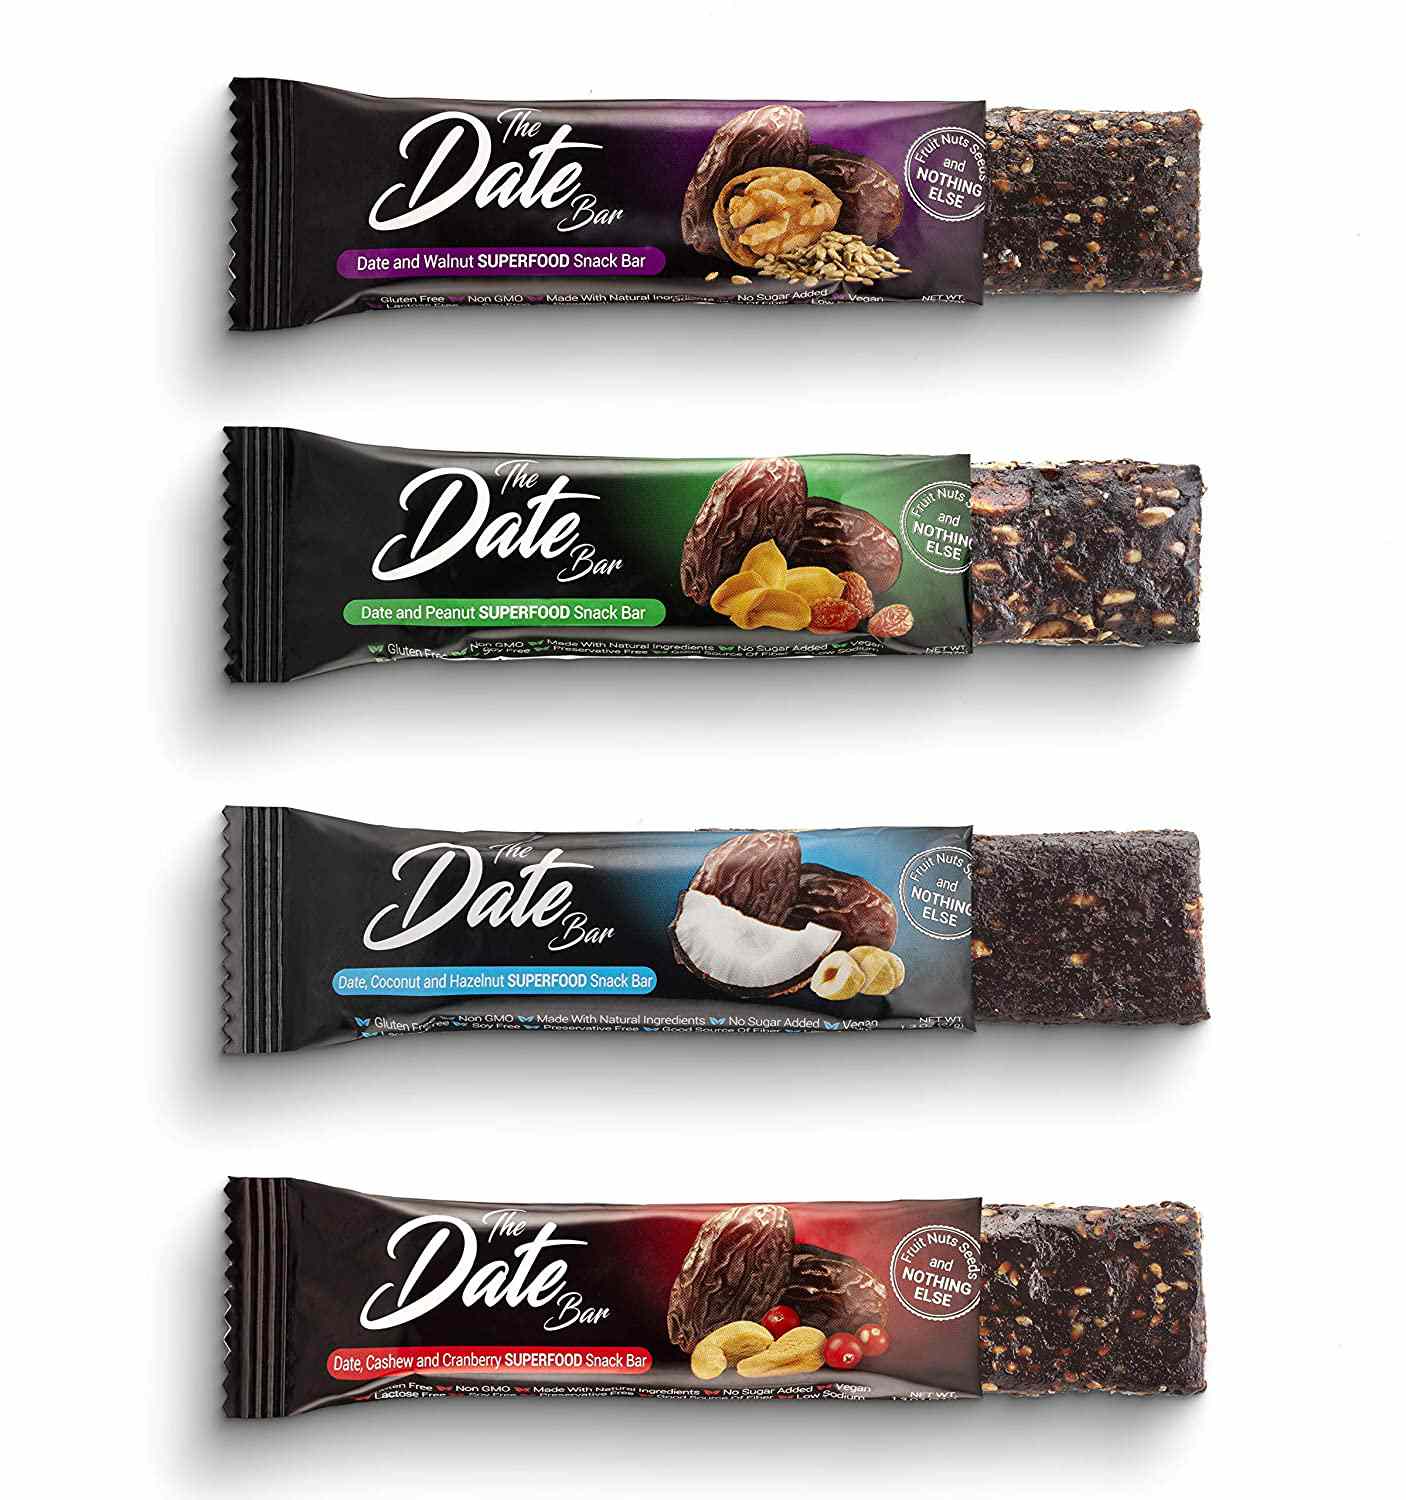 The Date Bars in four flavors